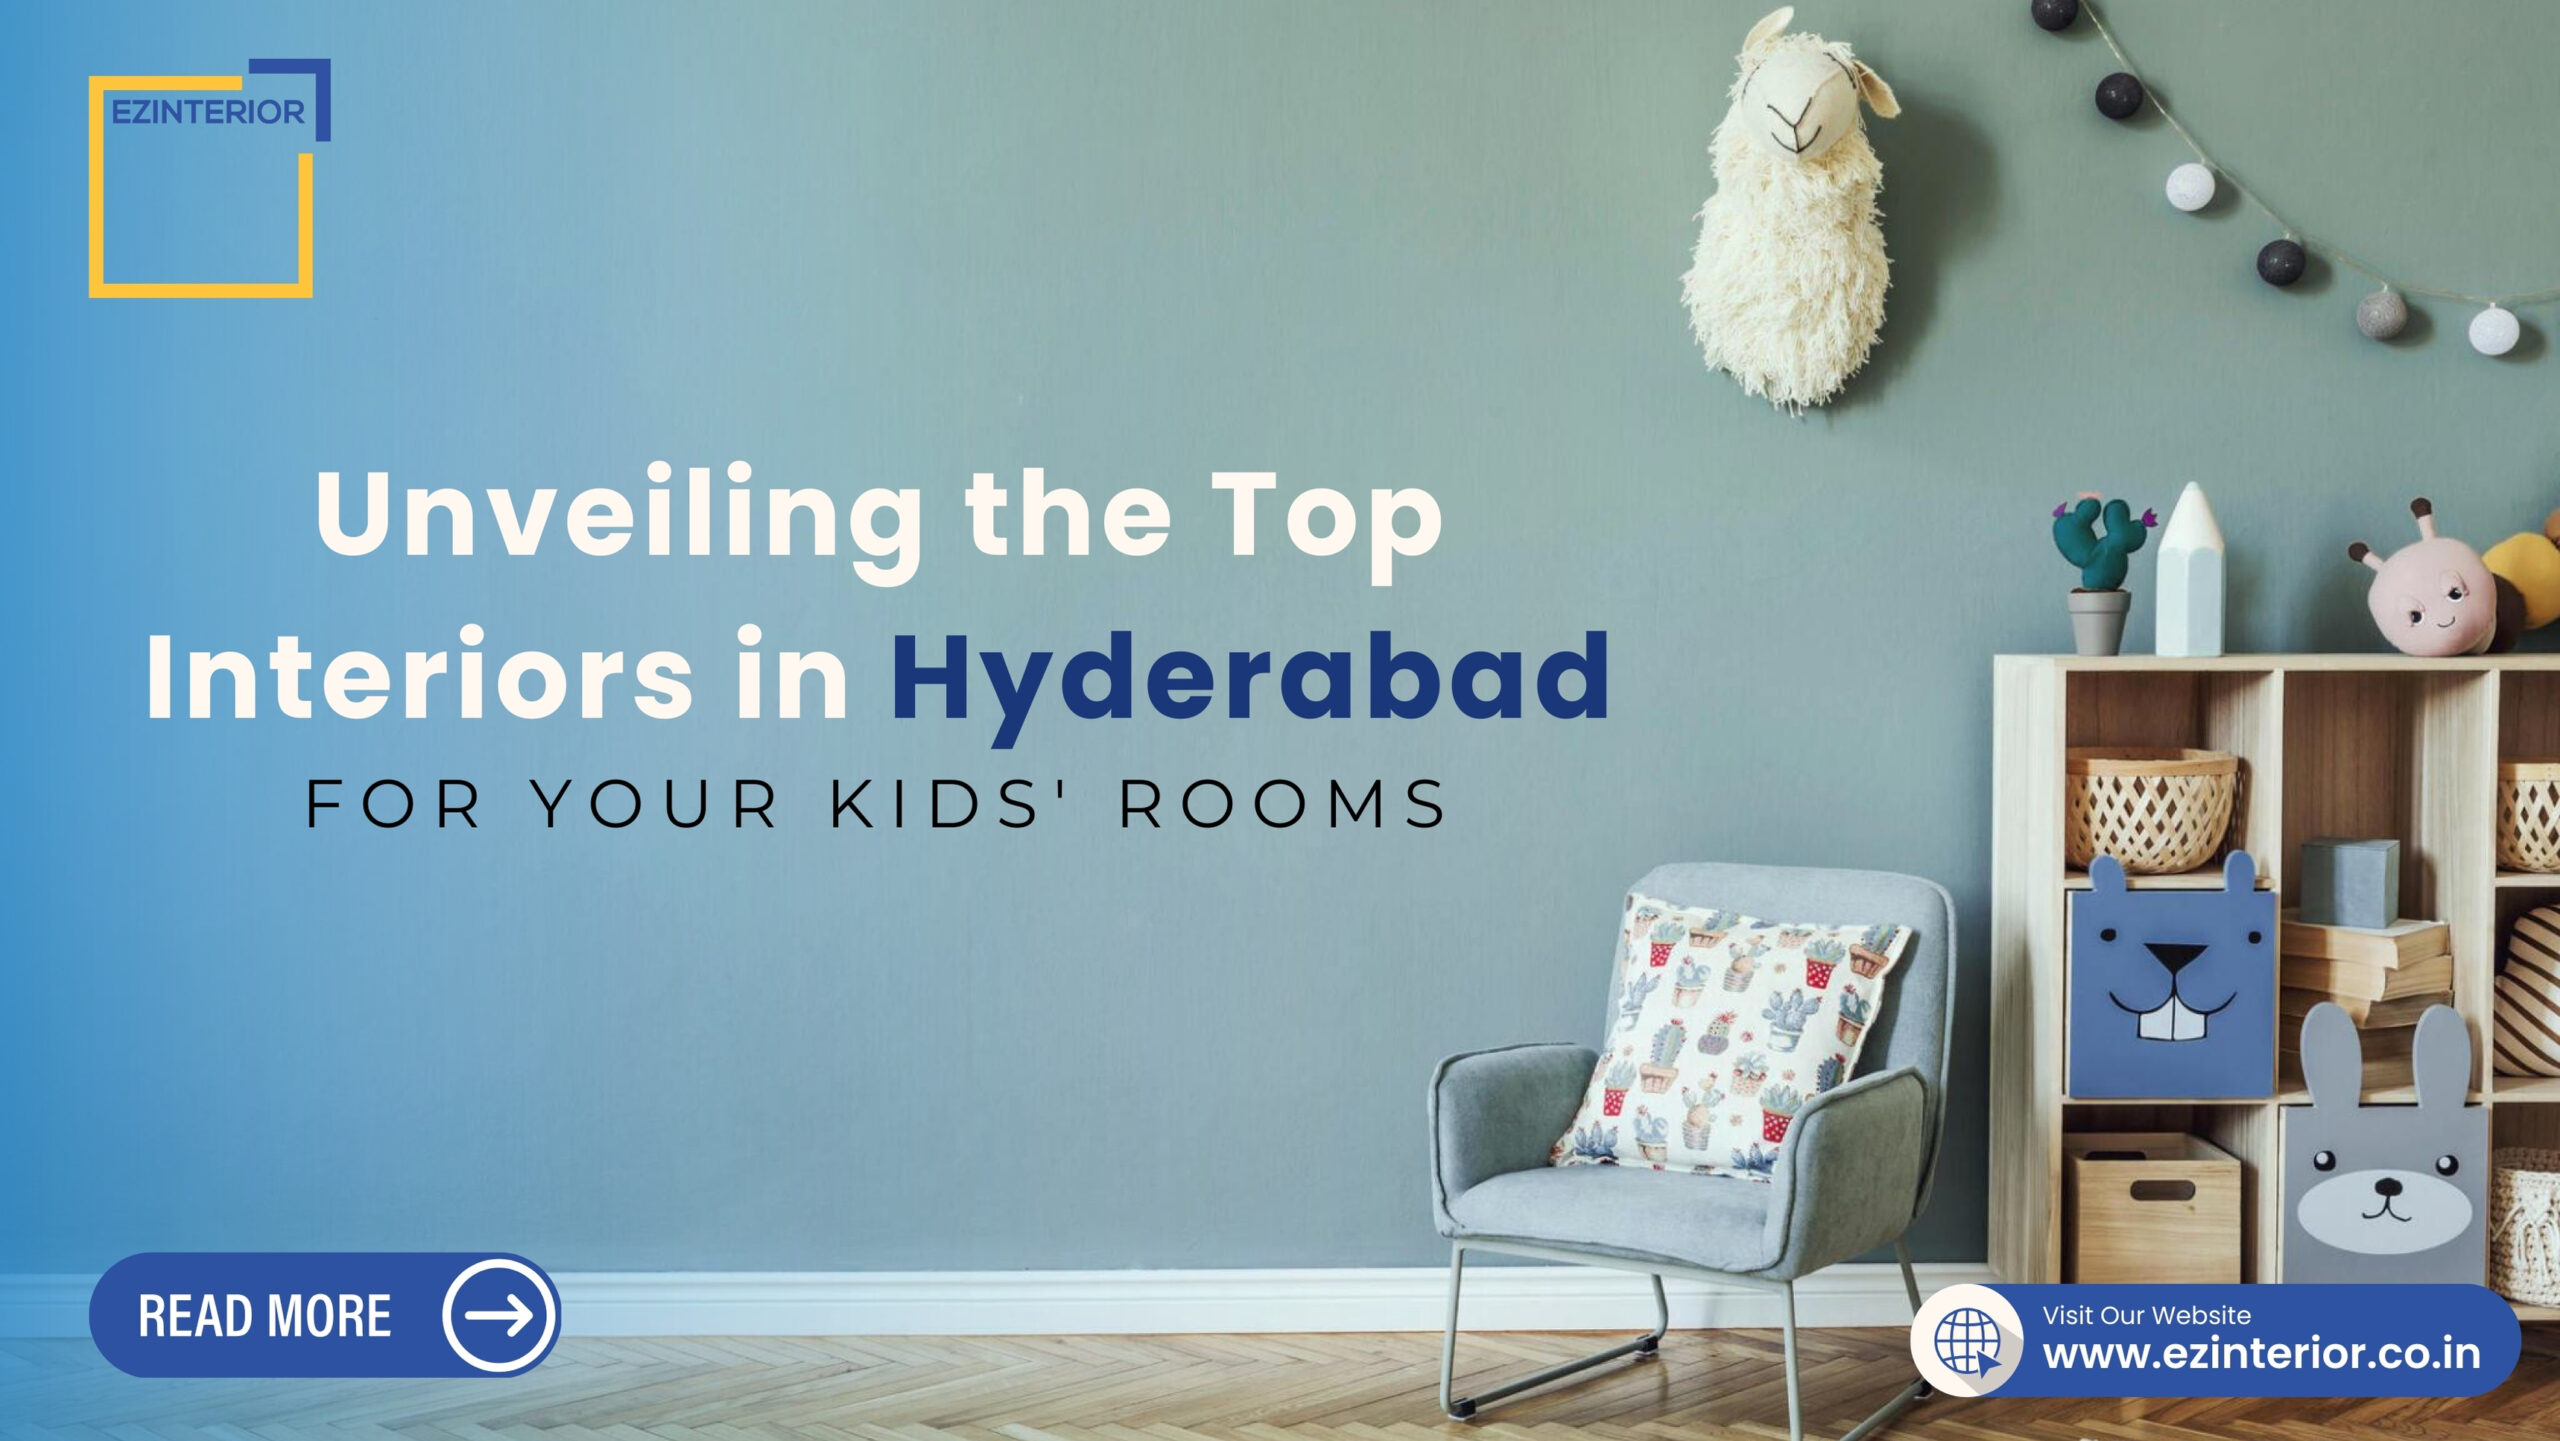 ﻿Unveiling the Top Interior Design Services in Hyderabad for Your Kids' Rooms